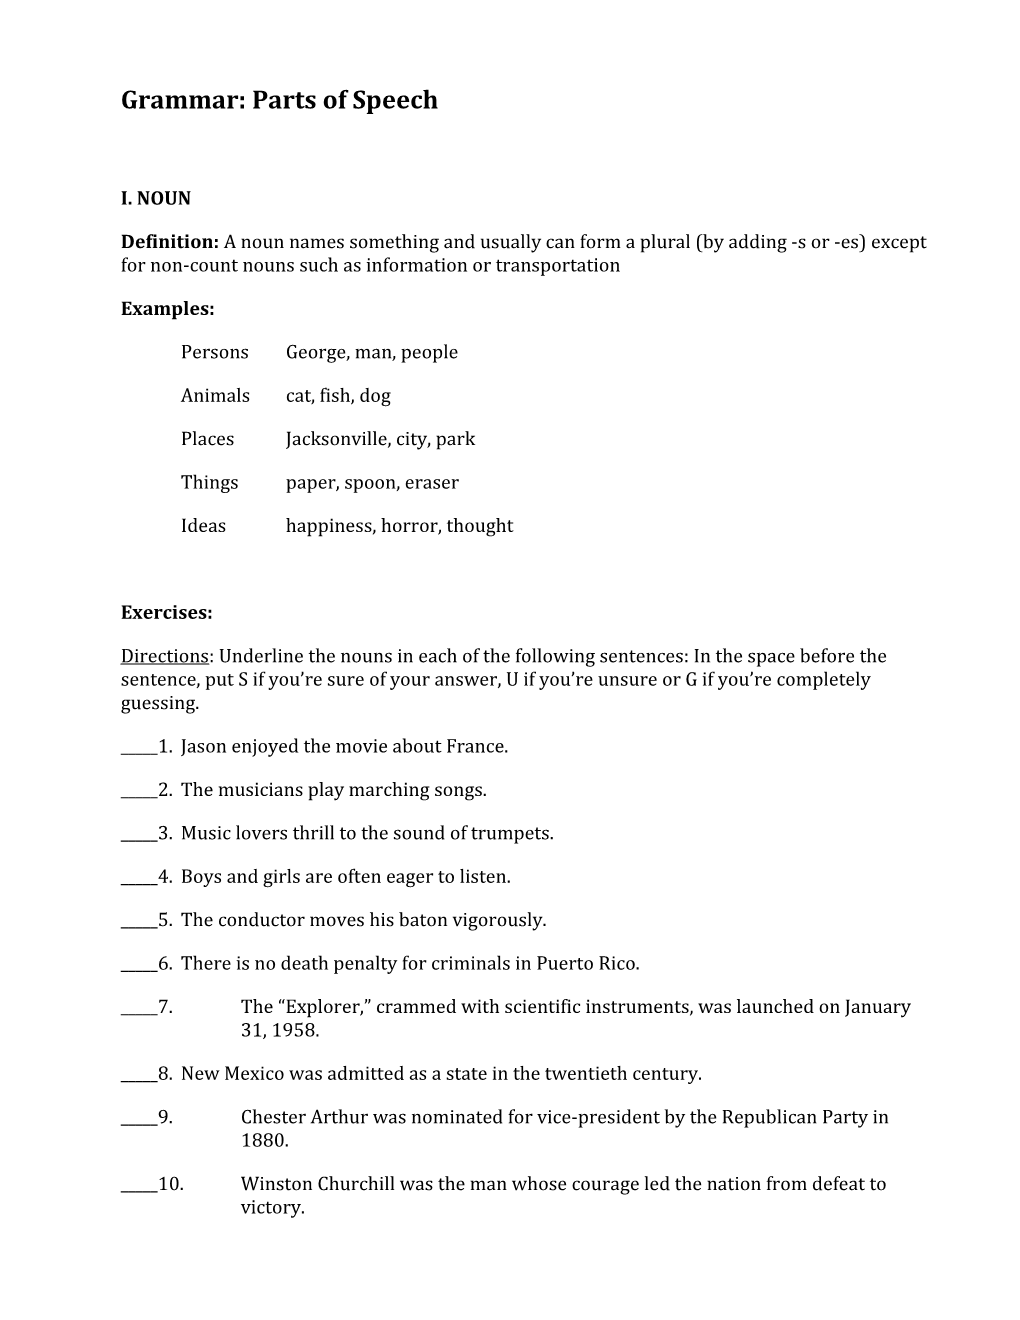 Answers for Parts of Speech Exercises